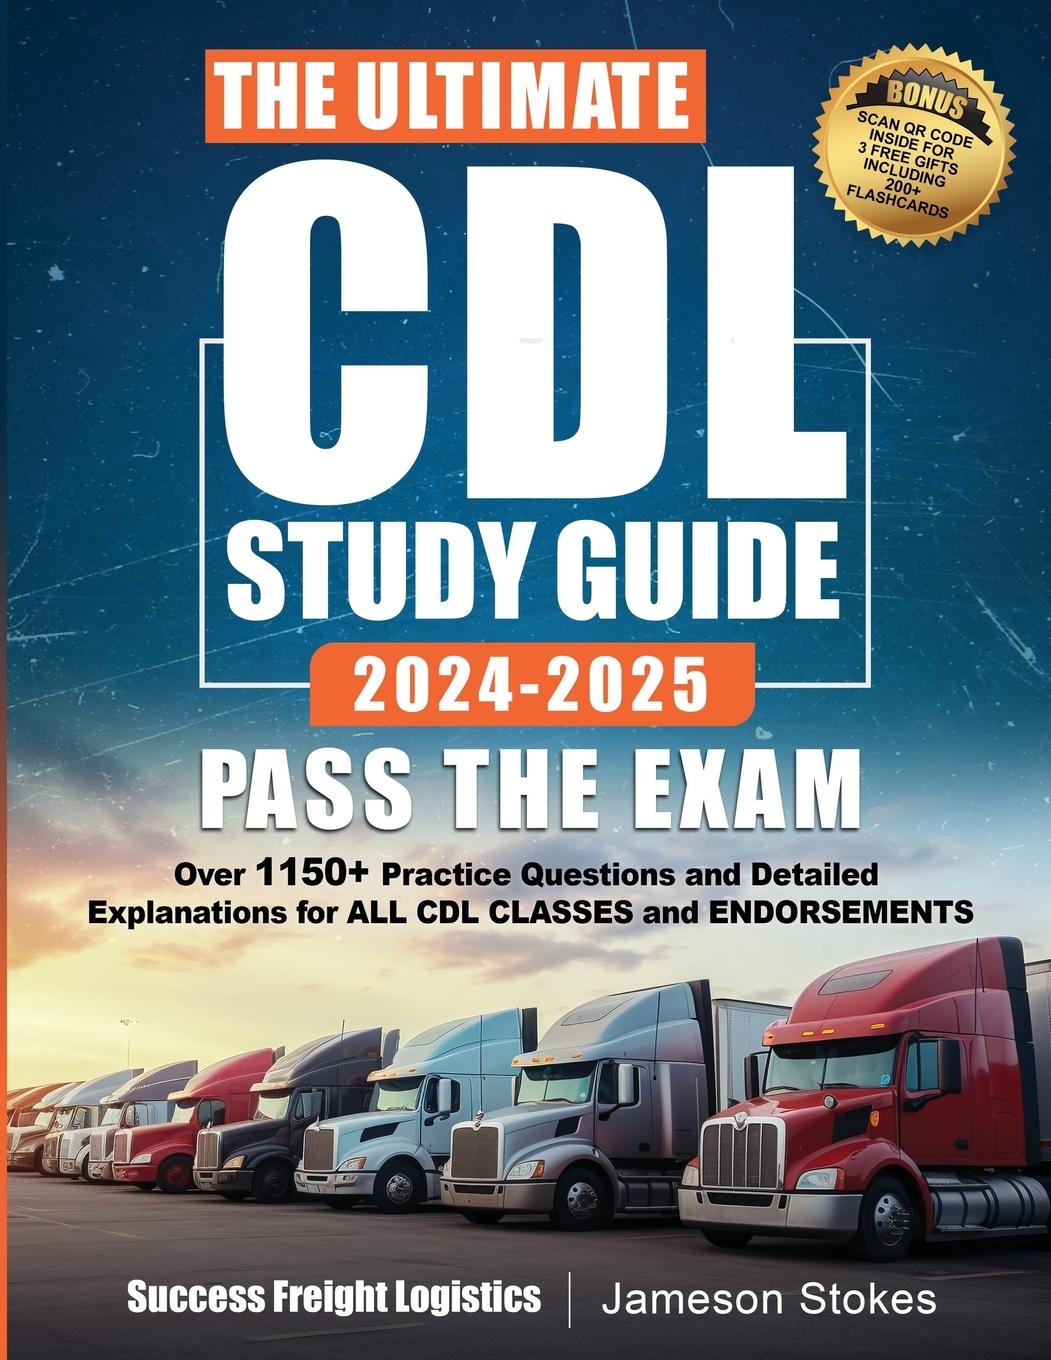 Книга The Ultimate CDL Study Guide 2024-2025 PASS THE EXAM Success Freight Logistics